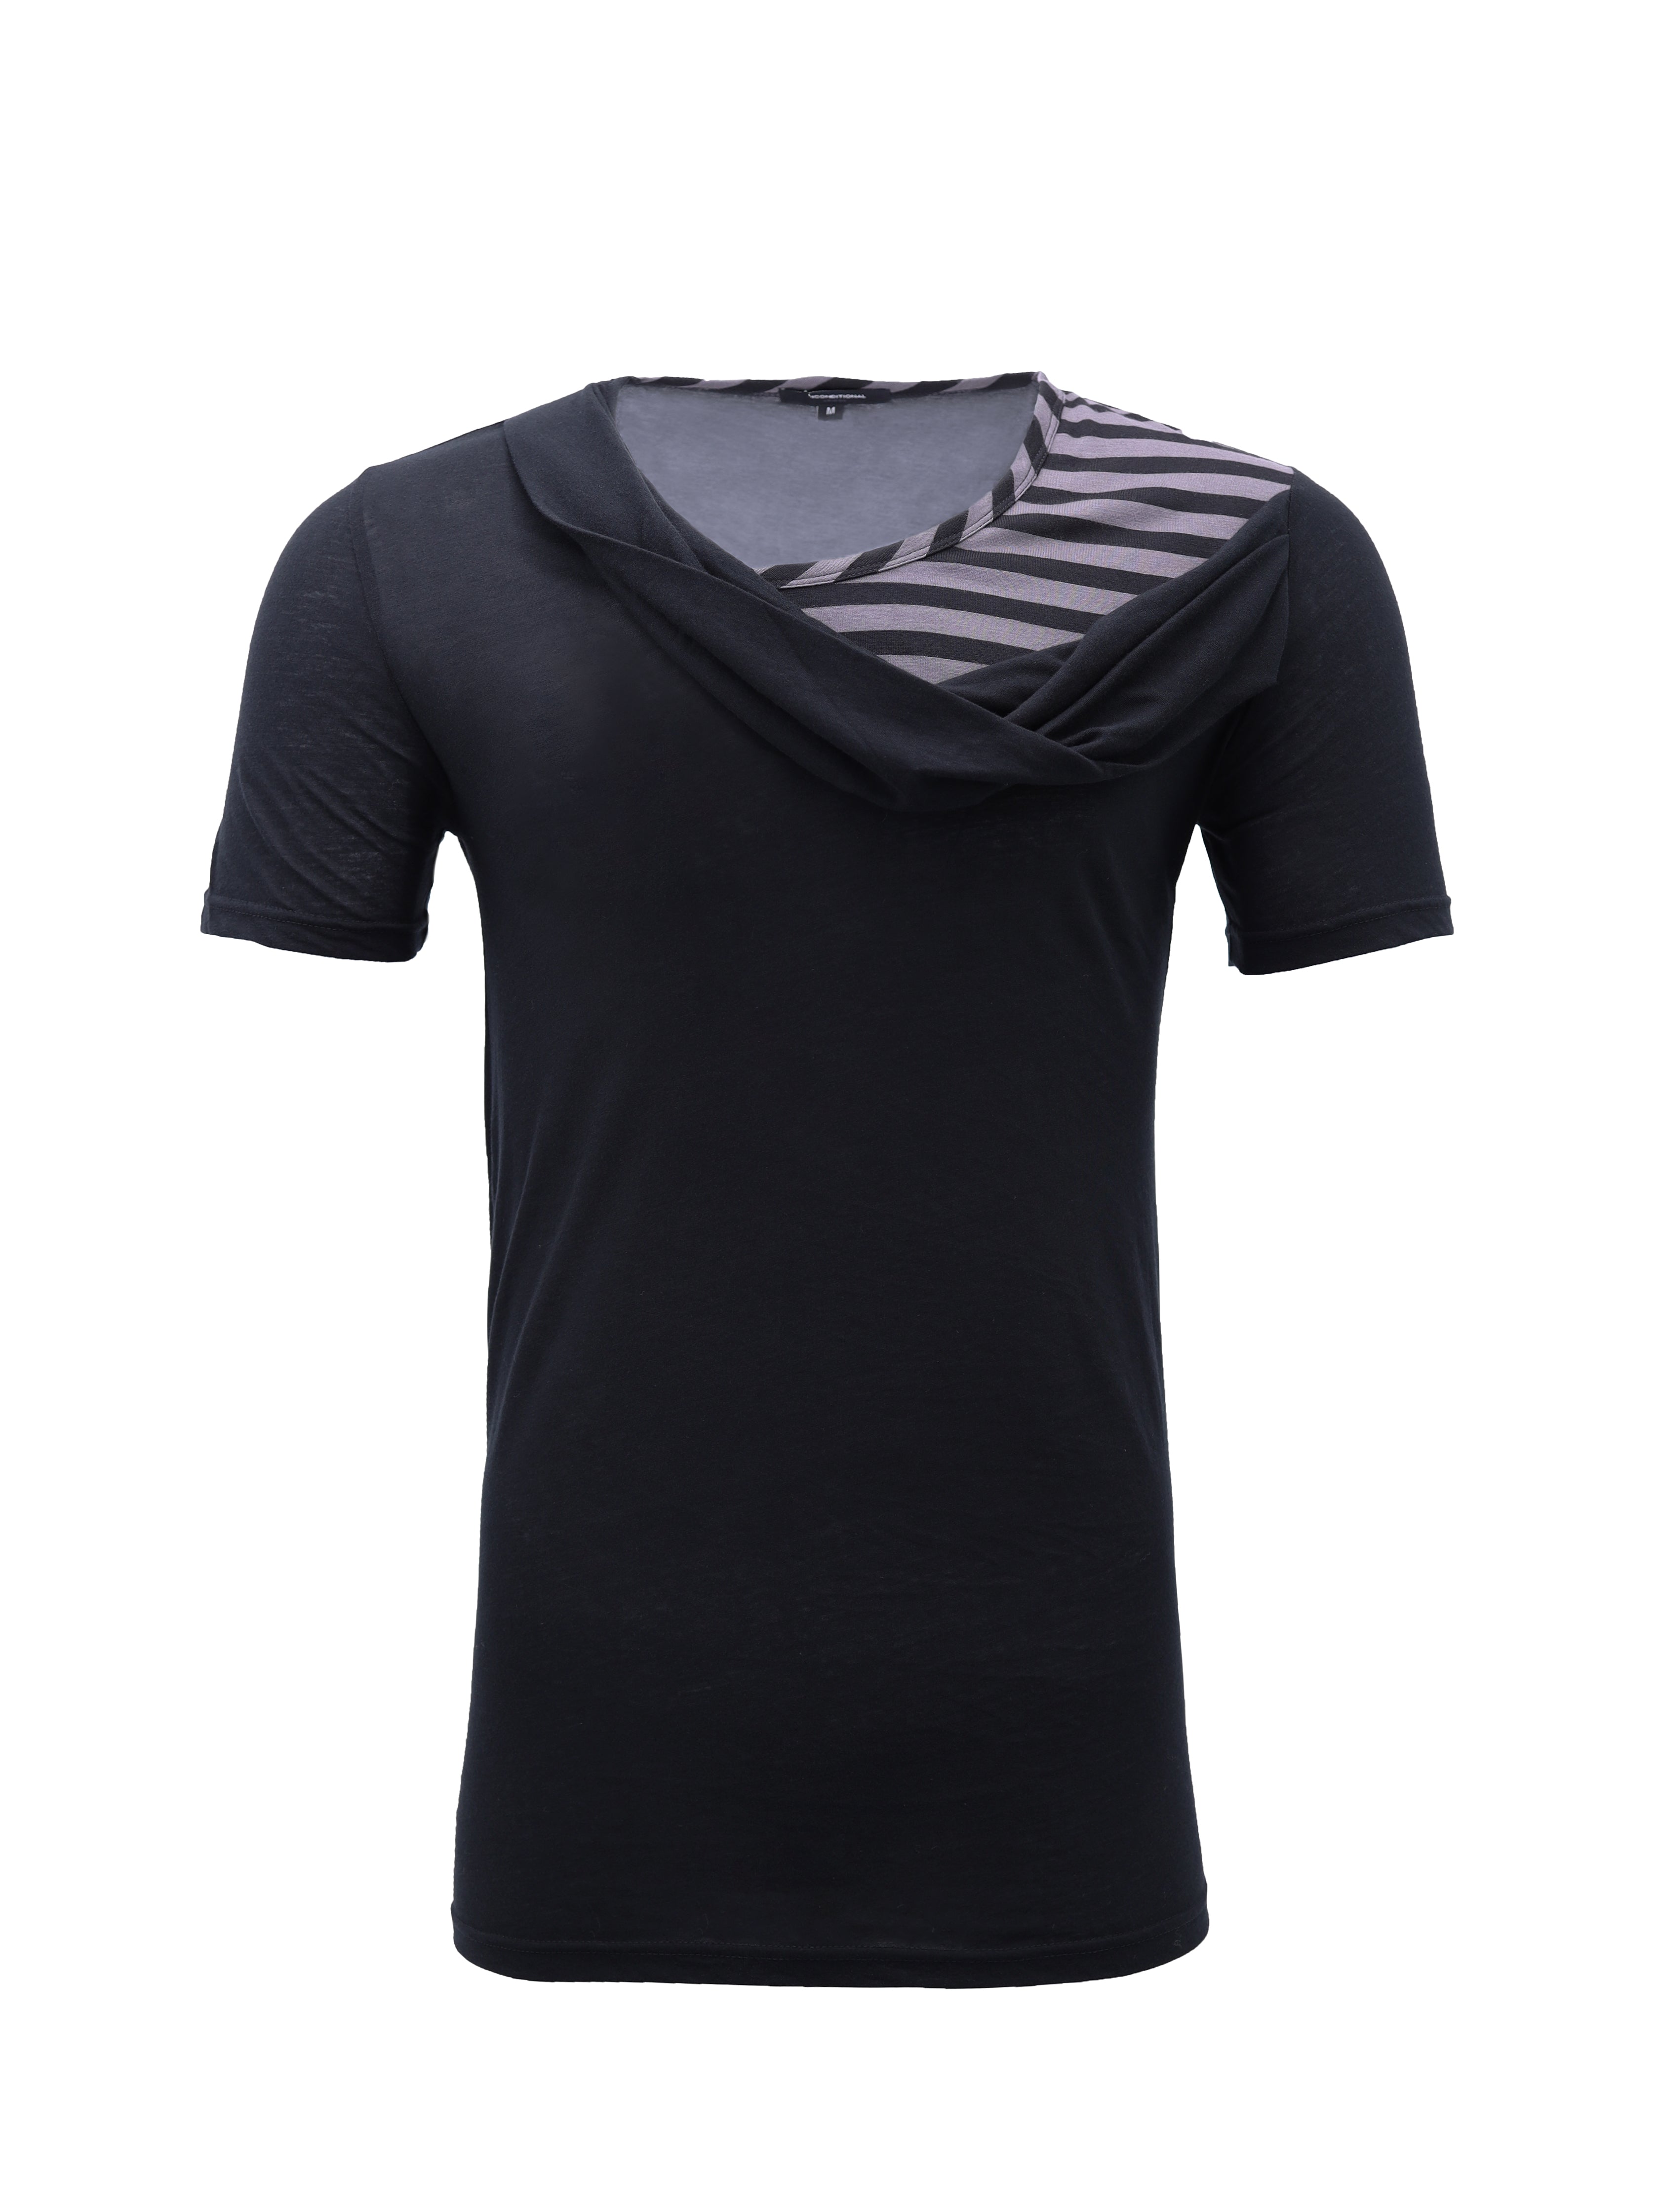 BLACK AND STRIPED SWOOP LAYERED T-SHIRT